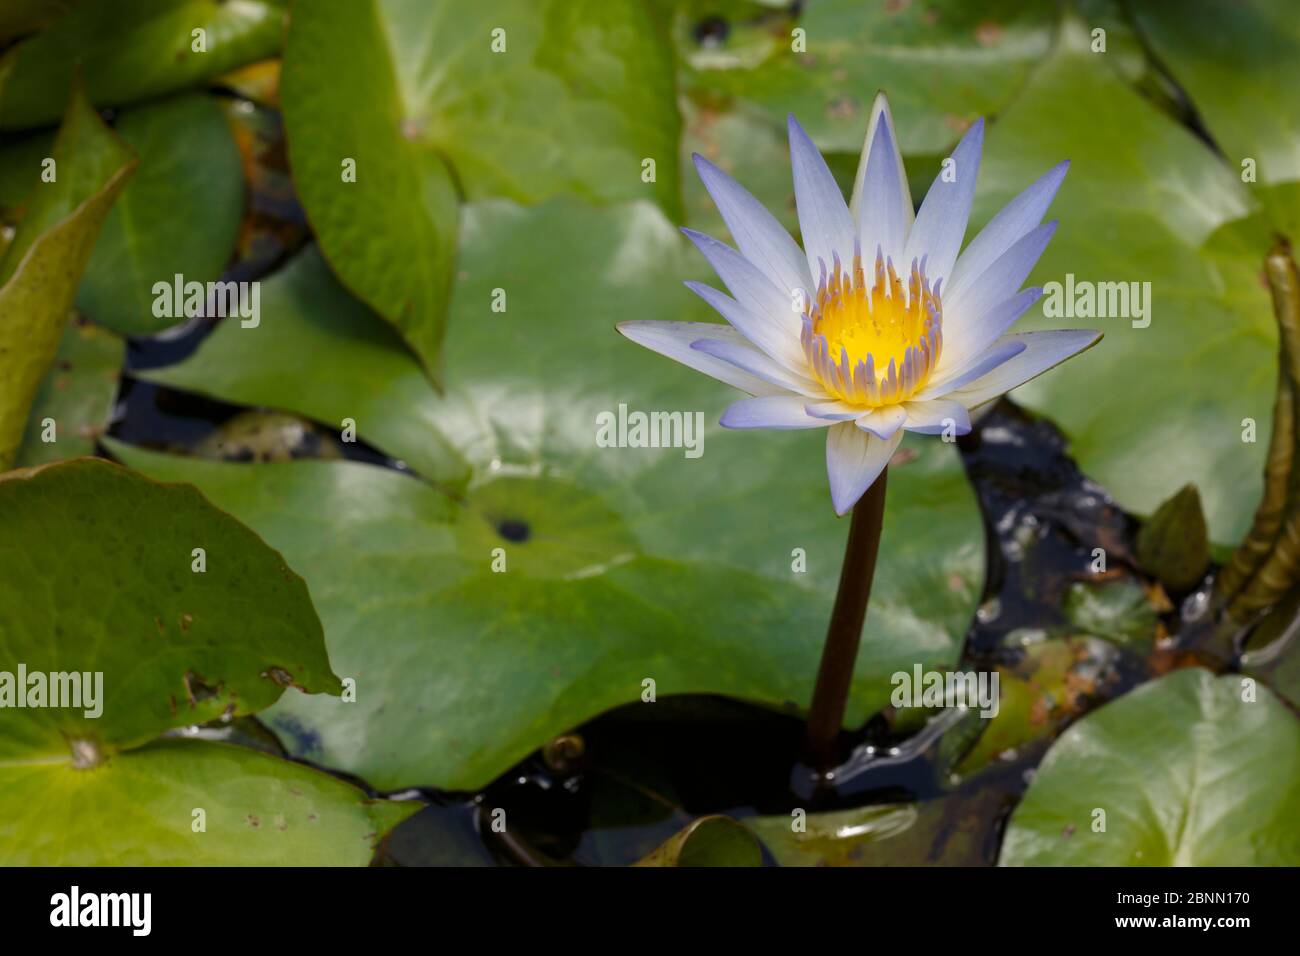 Blue water lily (Nymphaea stellata) flower, Costa Rica Stock Photo